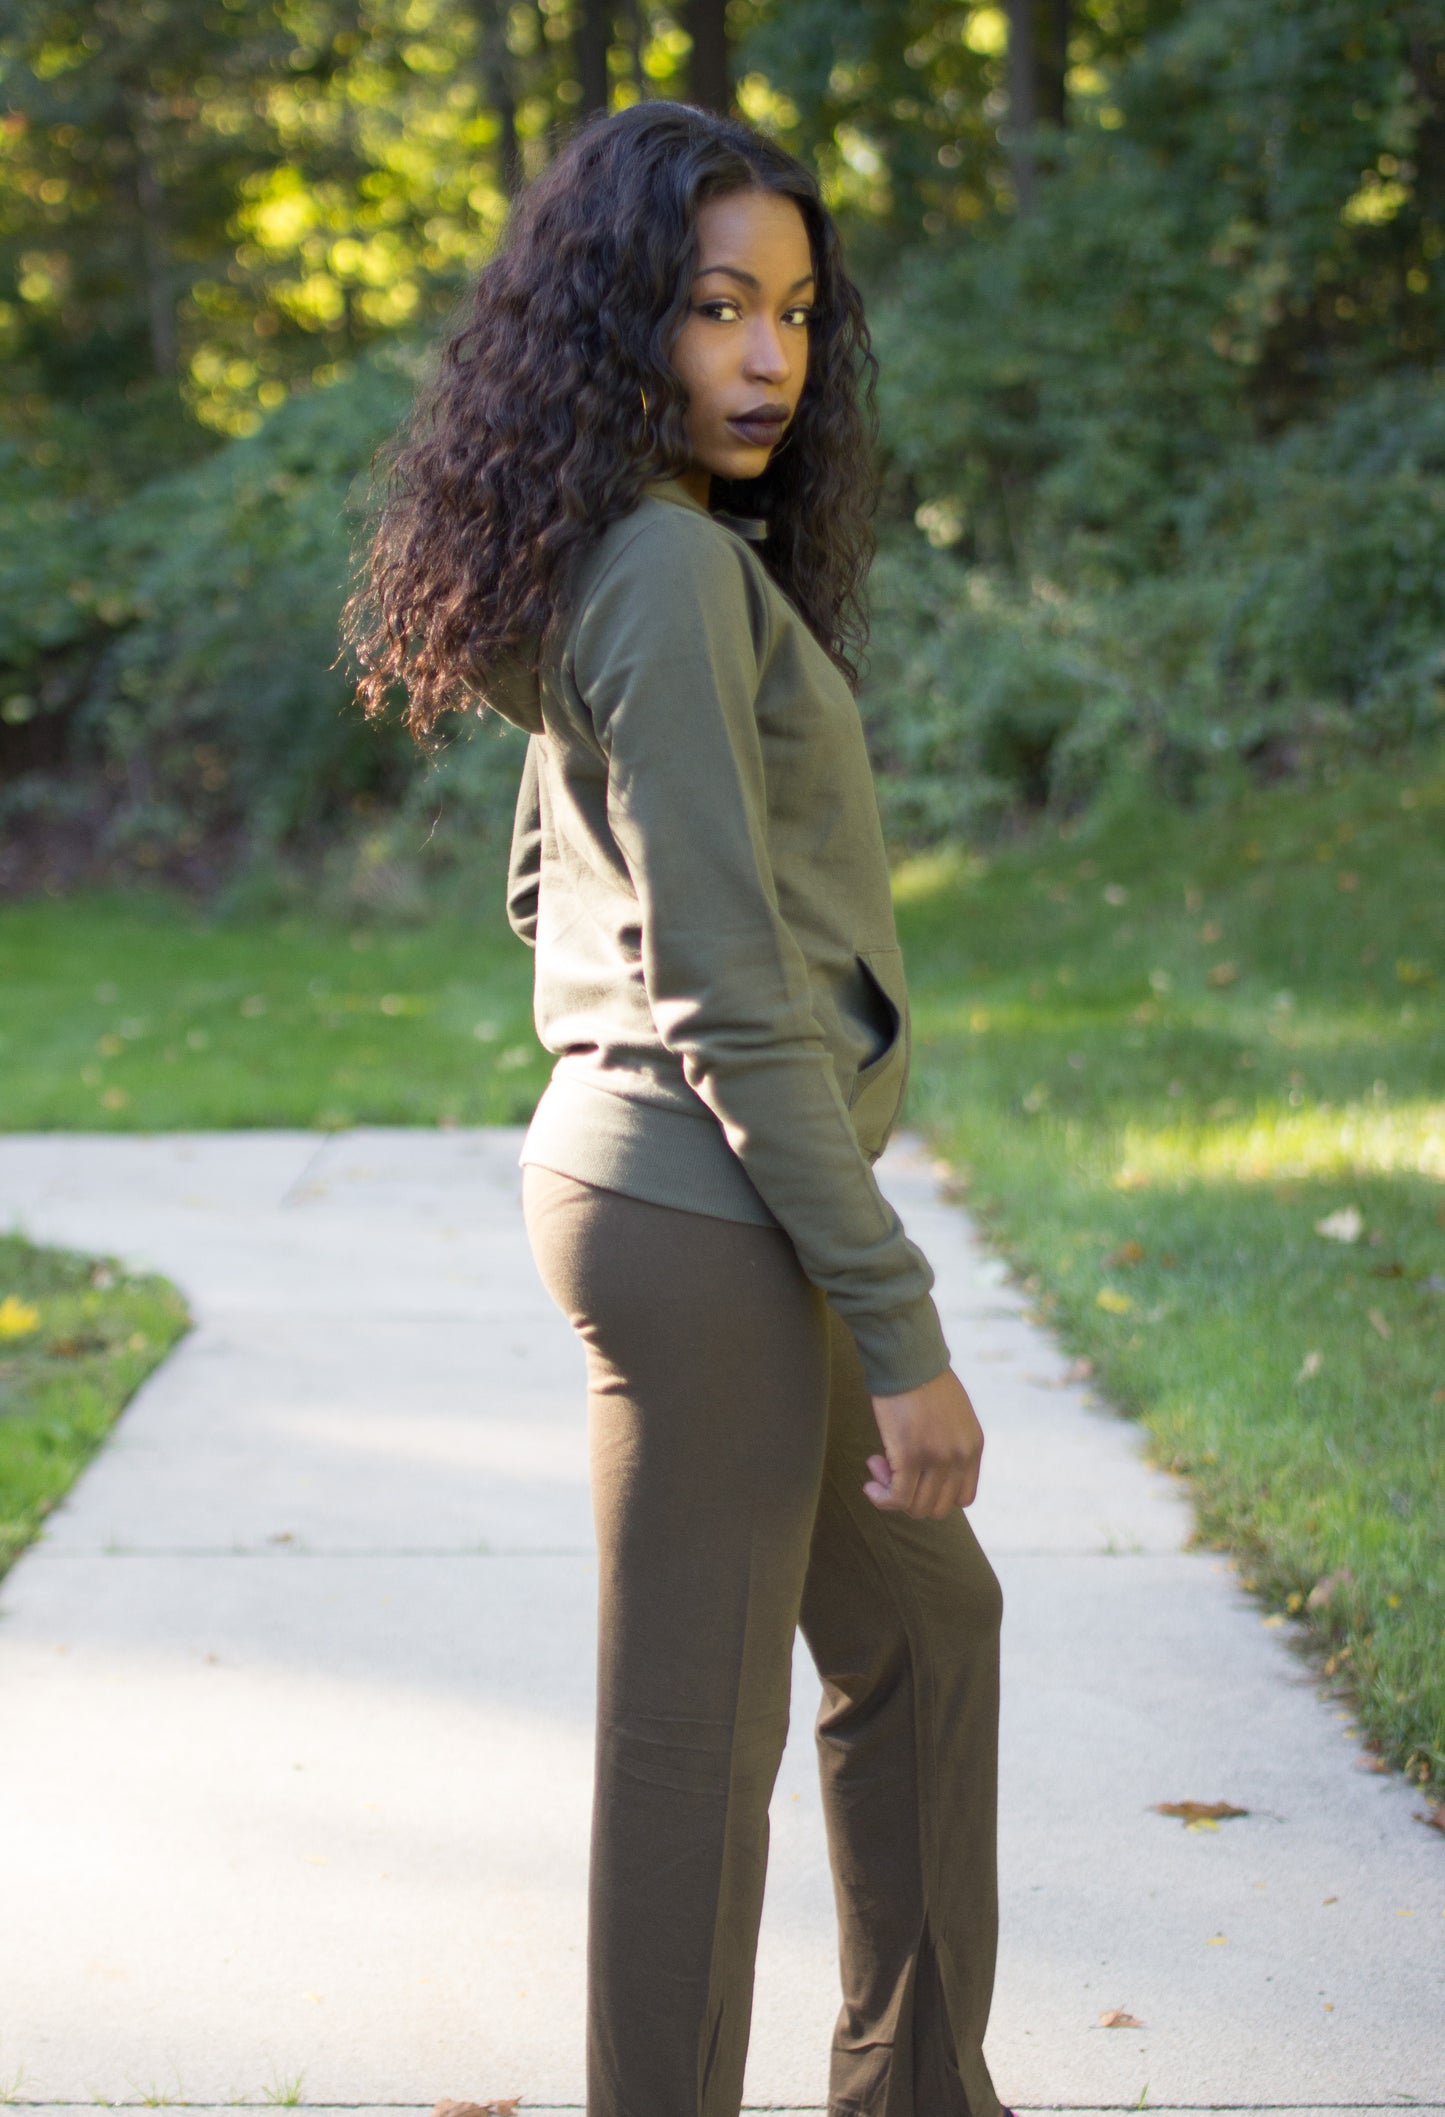 olive green top and bottom set